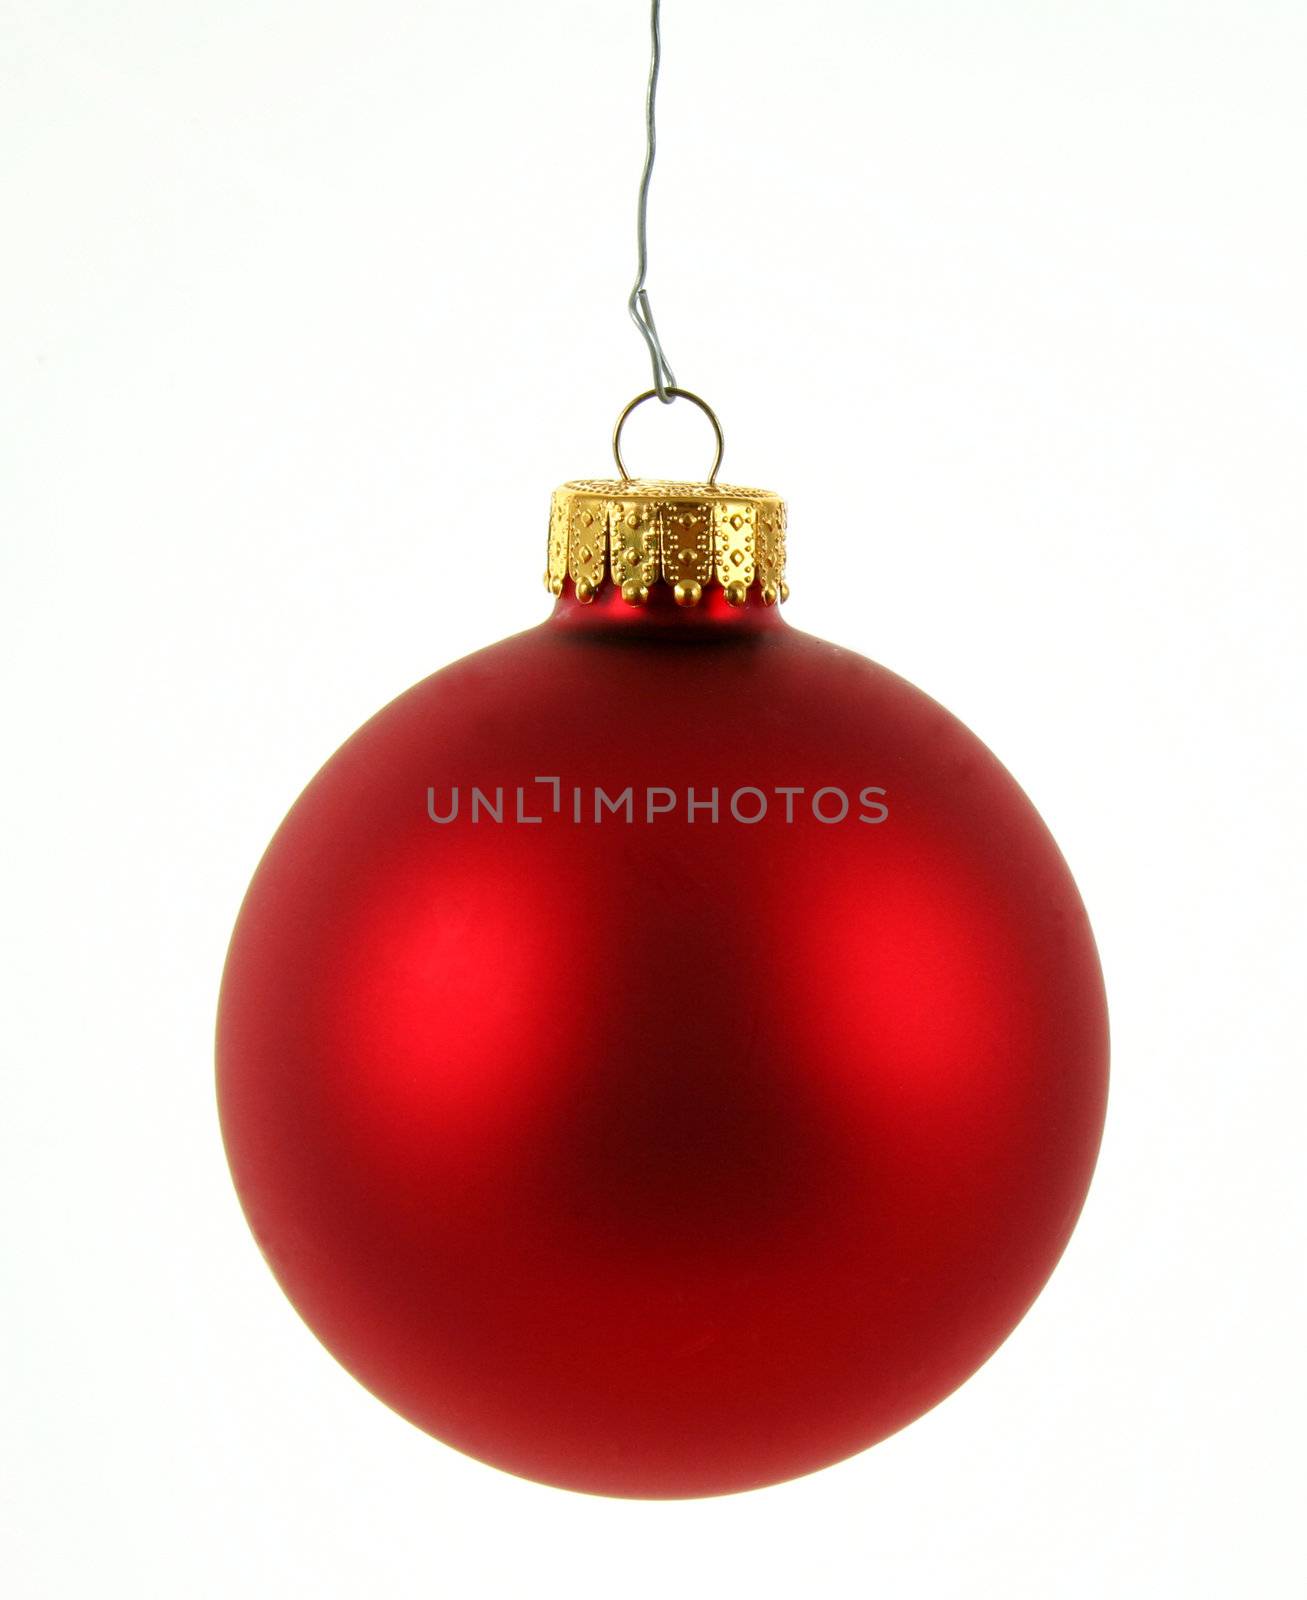 A single isolated red Christmas bauble hanging.
